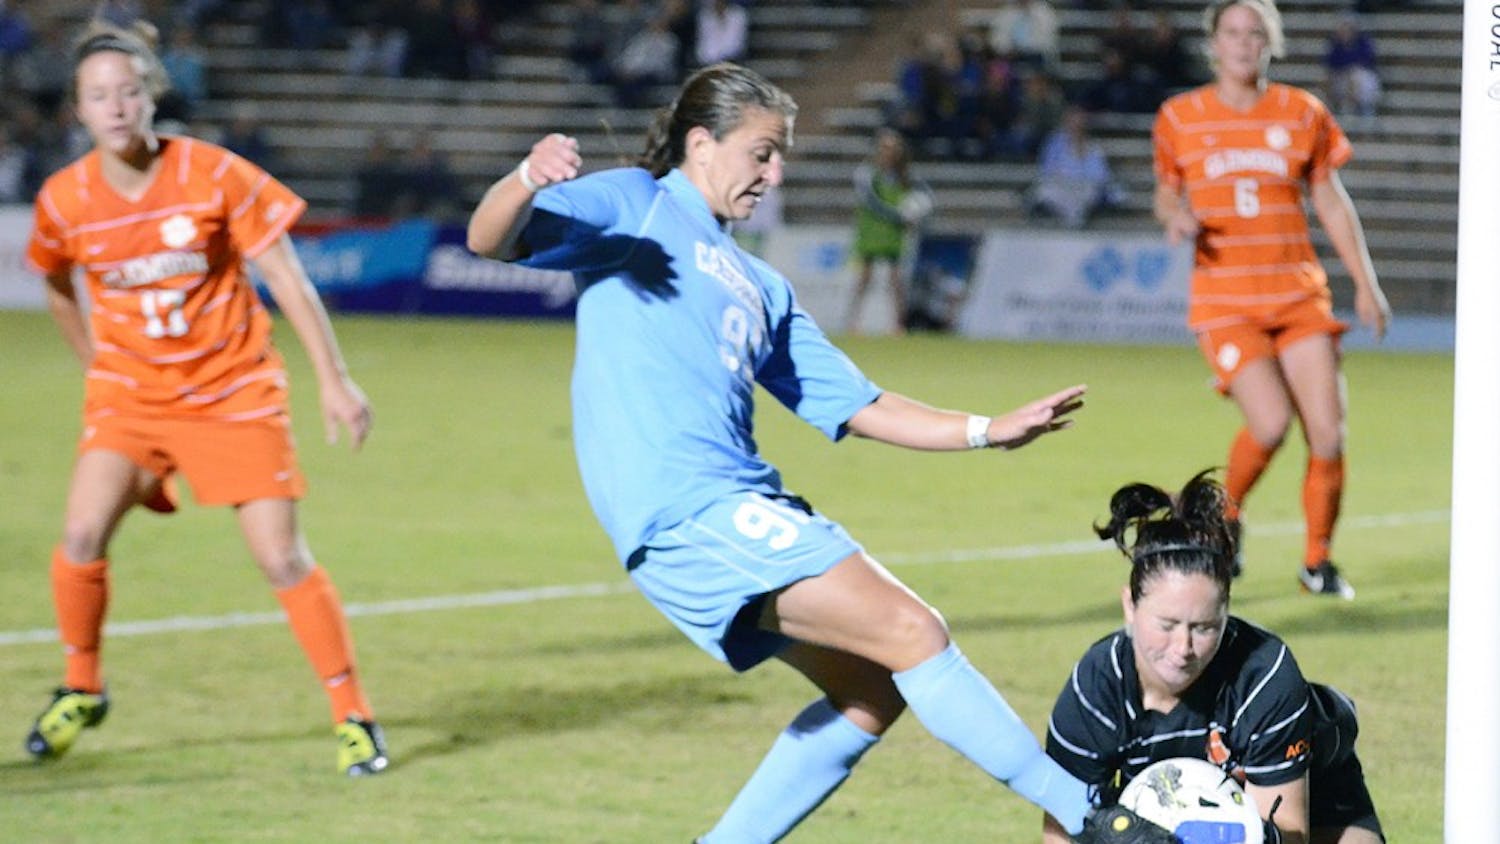 Photo: UNC women's soccer midfielder back in action after injuries (Kevin Minogue)